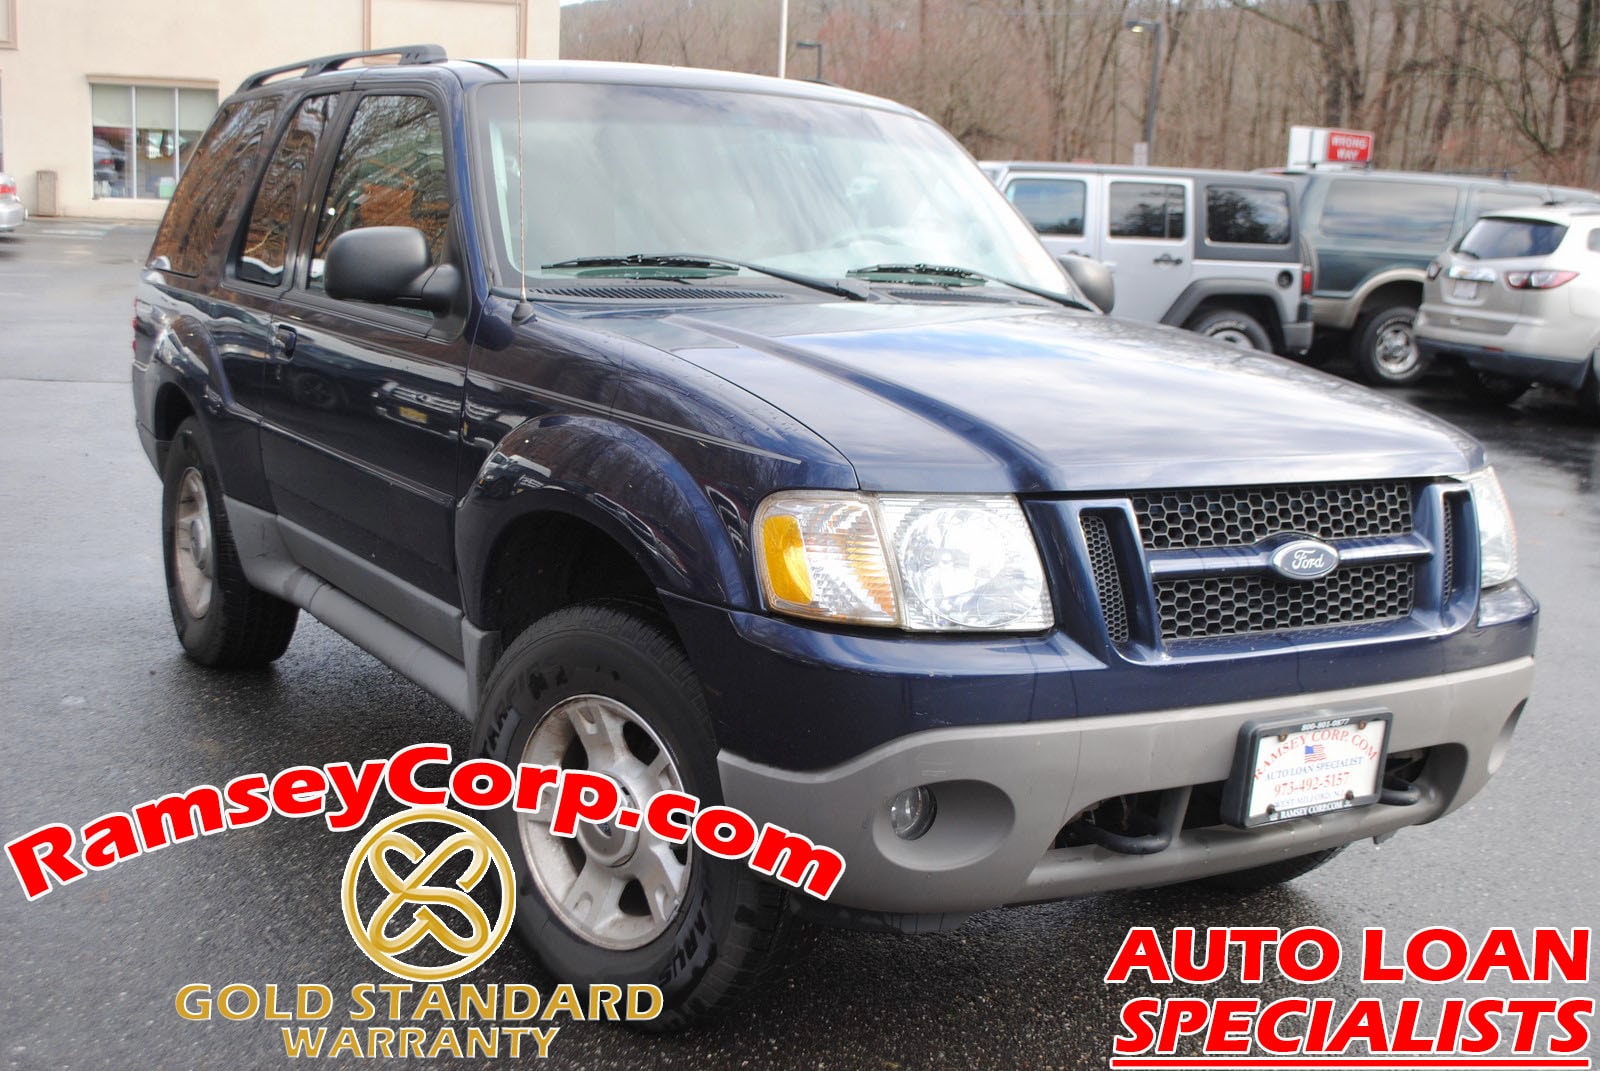 Used 2003 Ford Explorer Sport For Sale at Ramsey Corp. | VIN:  1FMZU70E83UA12664